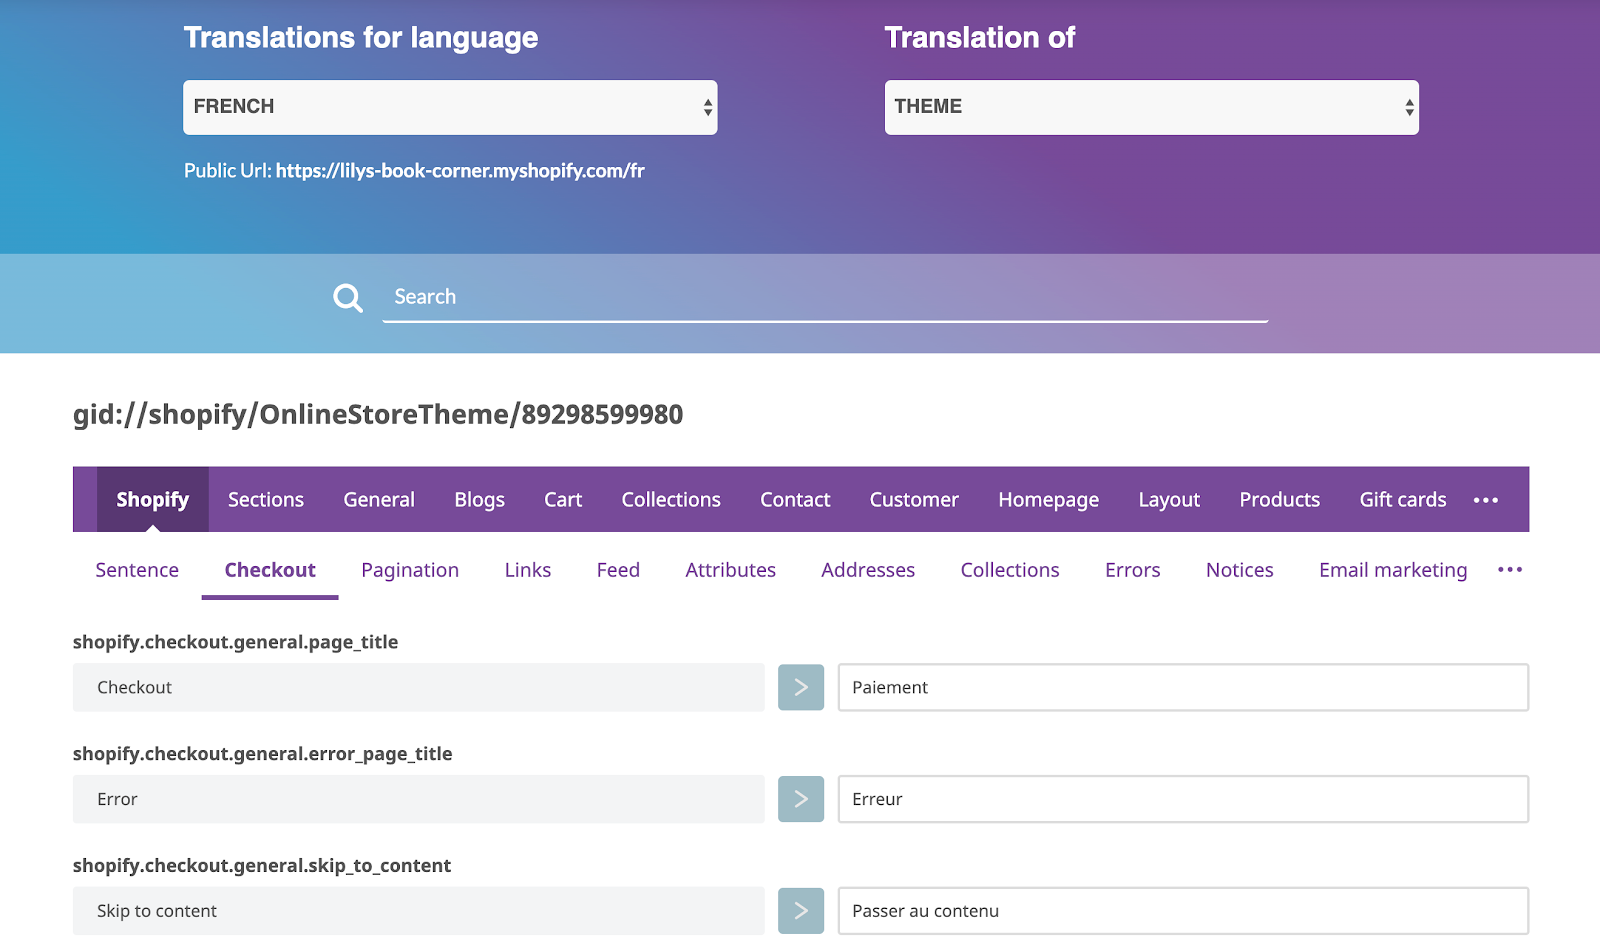 Shopify translation helps you translate your Shopify shop to another language